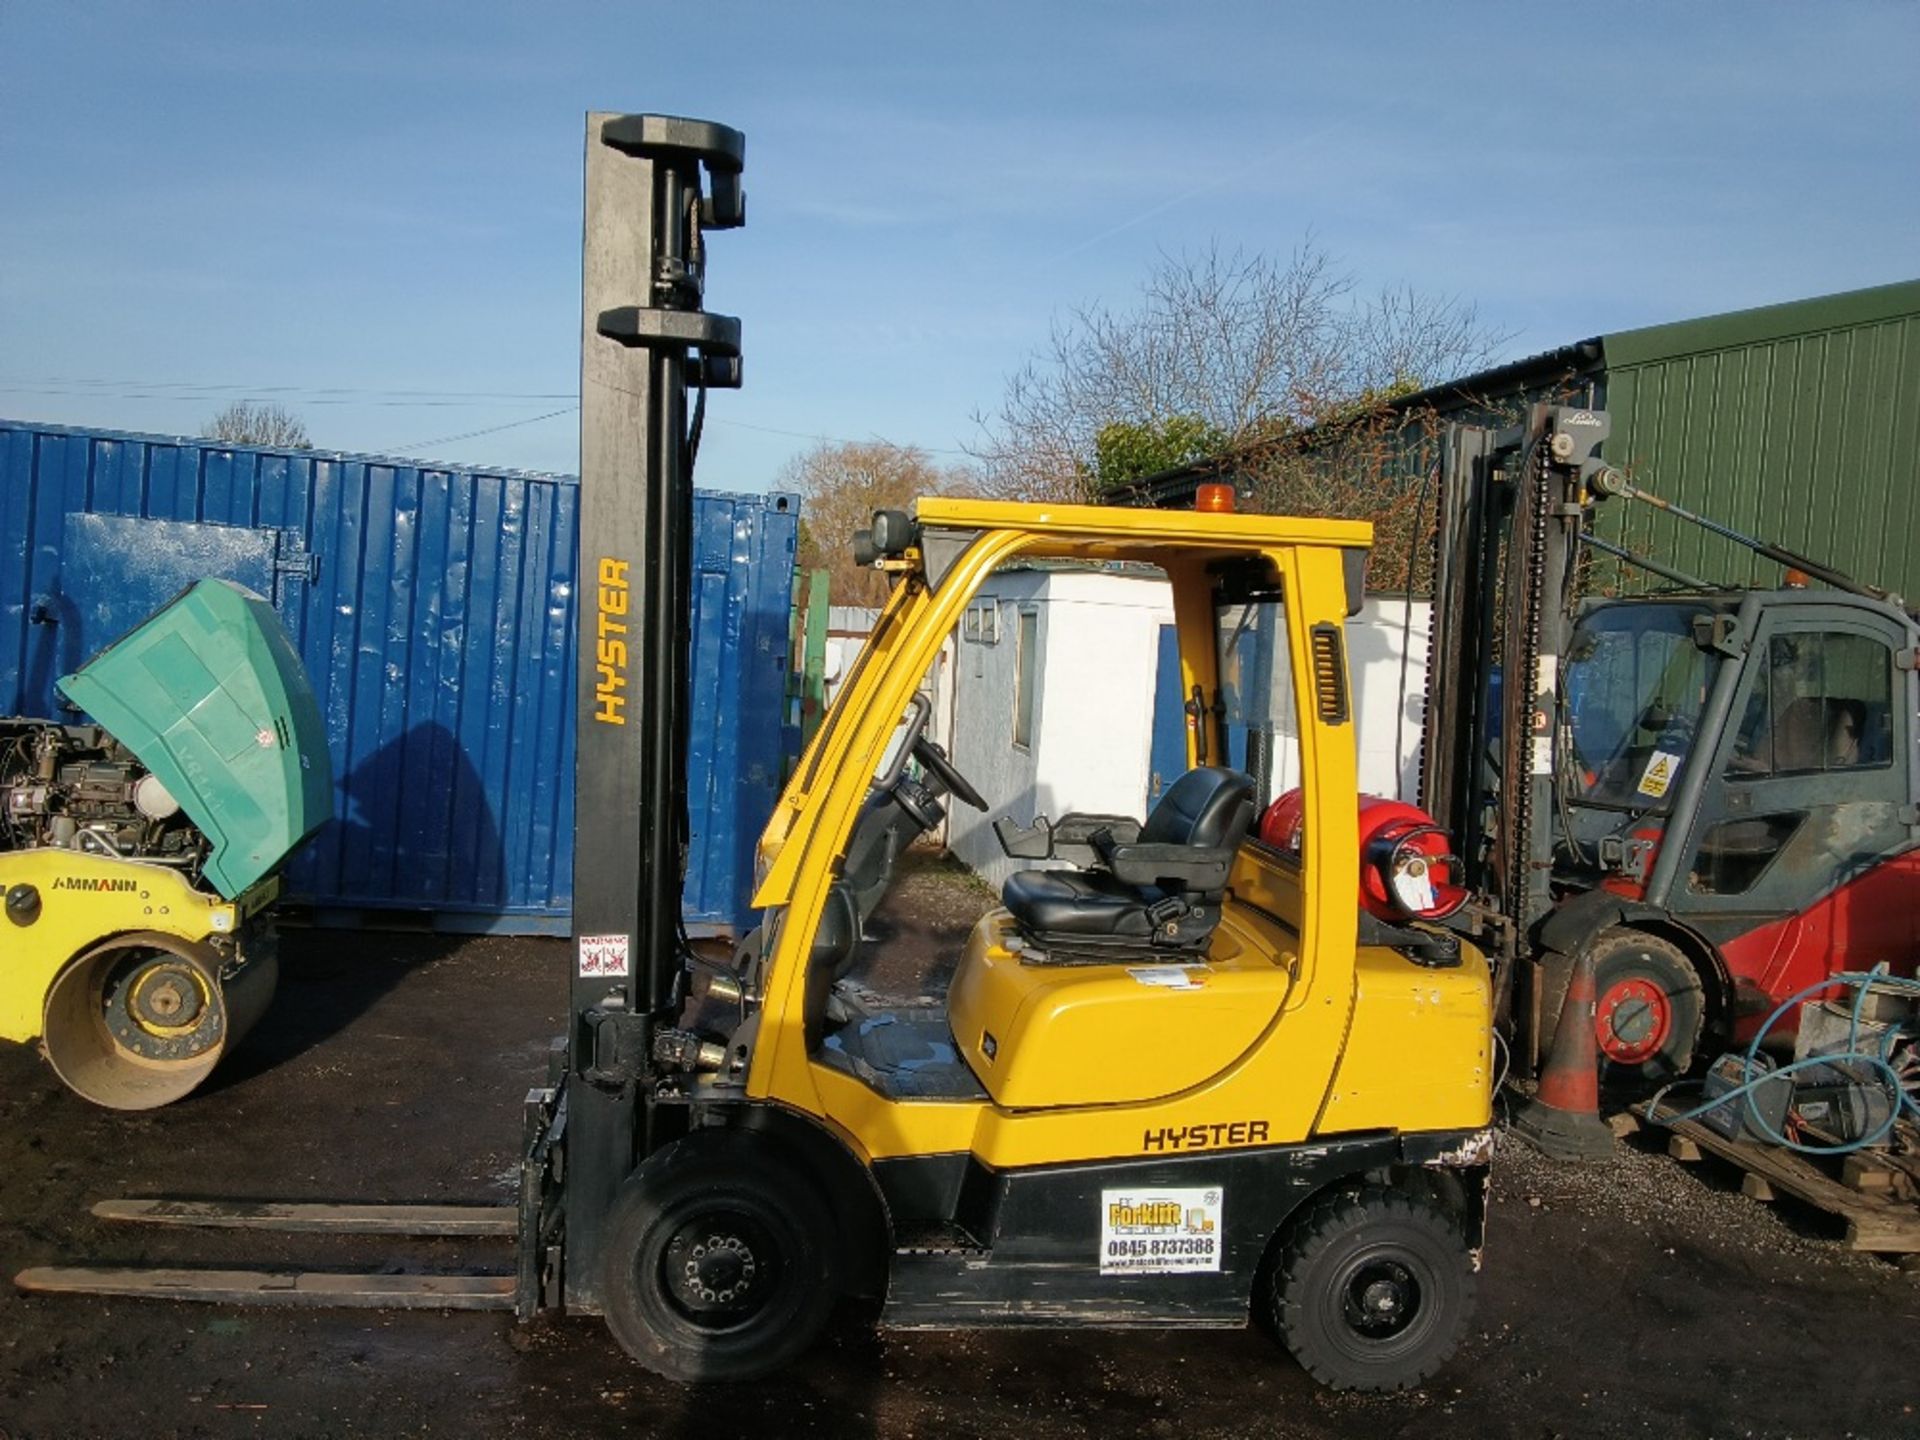 HYSTER 2.6 GAS POWERED FORKLIFT TRUCK WITH SIDE SHIFT. YEAR 2008. 2270KG RATED CAPACITY SOURCED FRO - Image 8 of 9